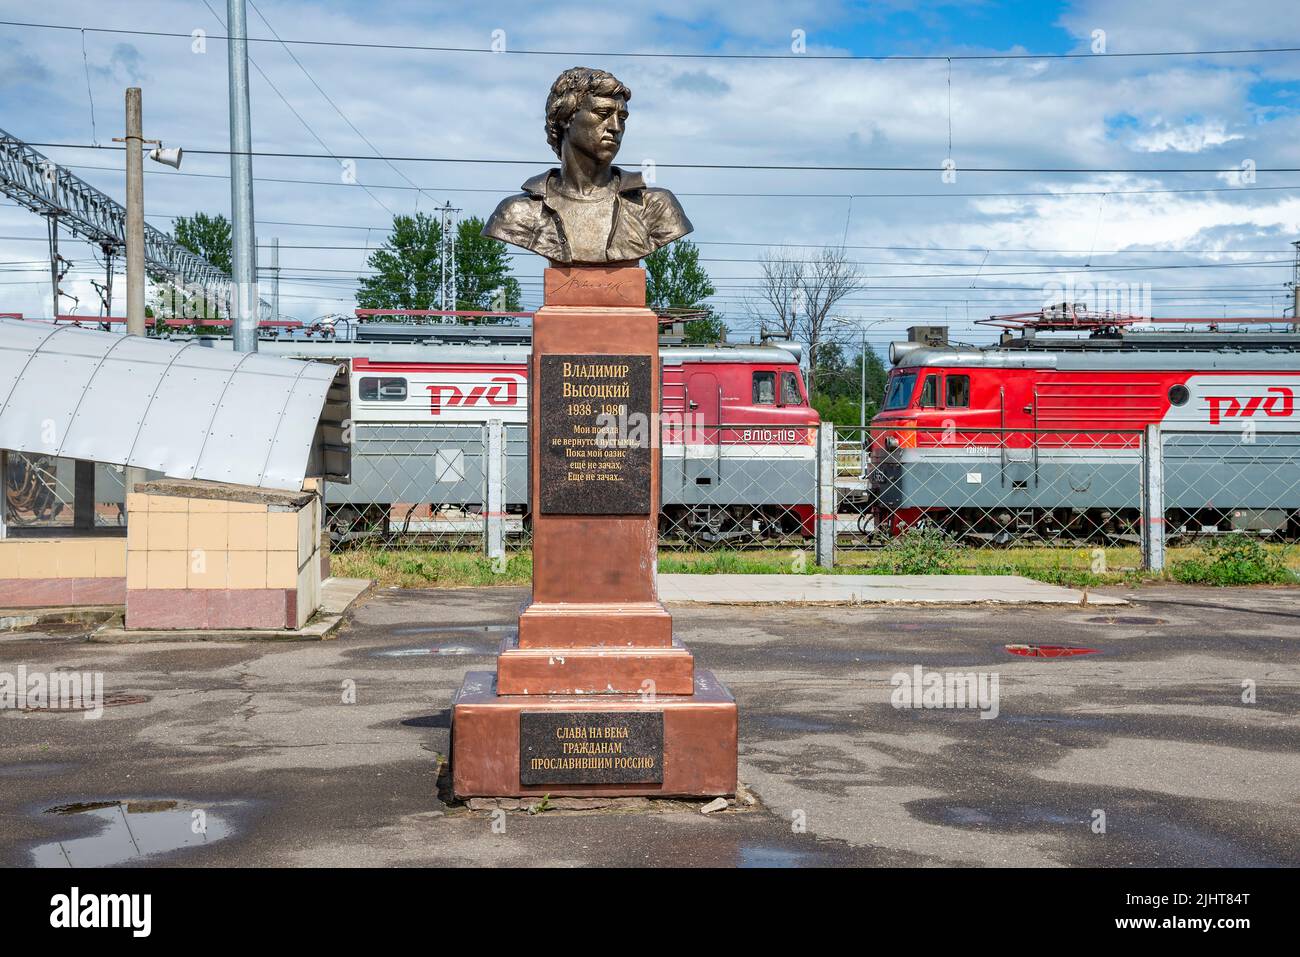 BOLOGOE, RUSSIA - JULY 16, 2022: Monument to Vladimir Vysotsky on the forecourt. Bologoe Stock Photo